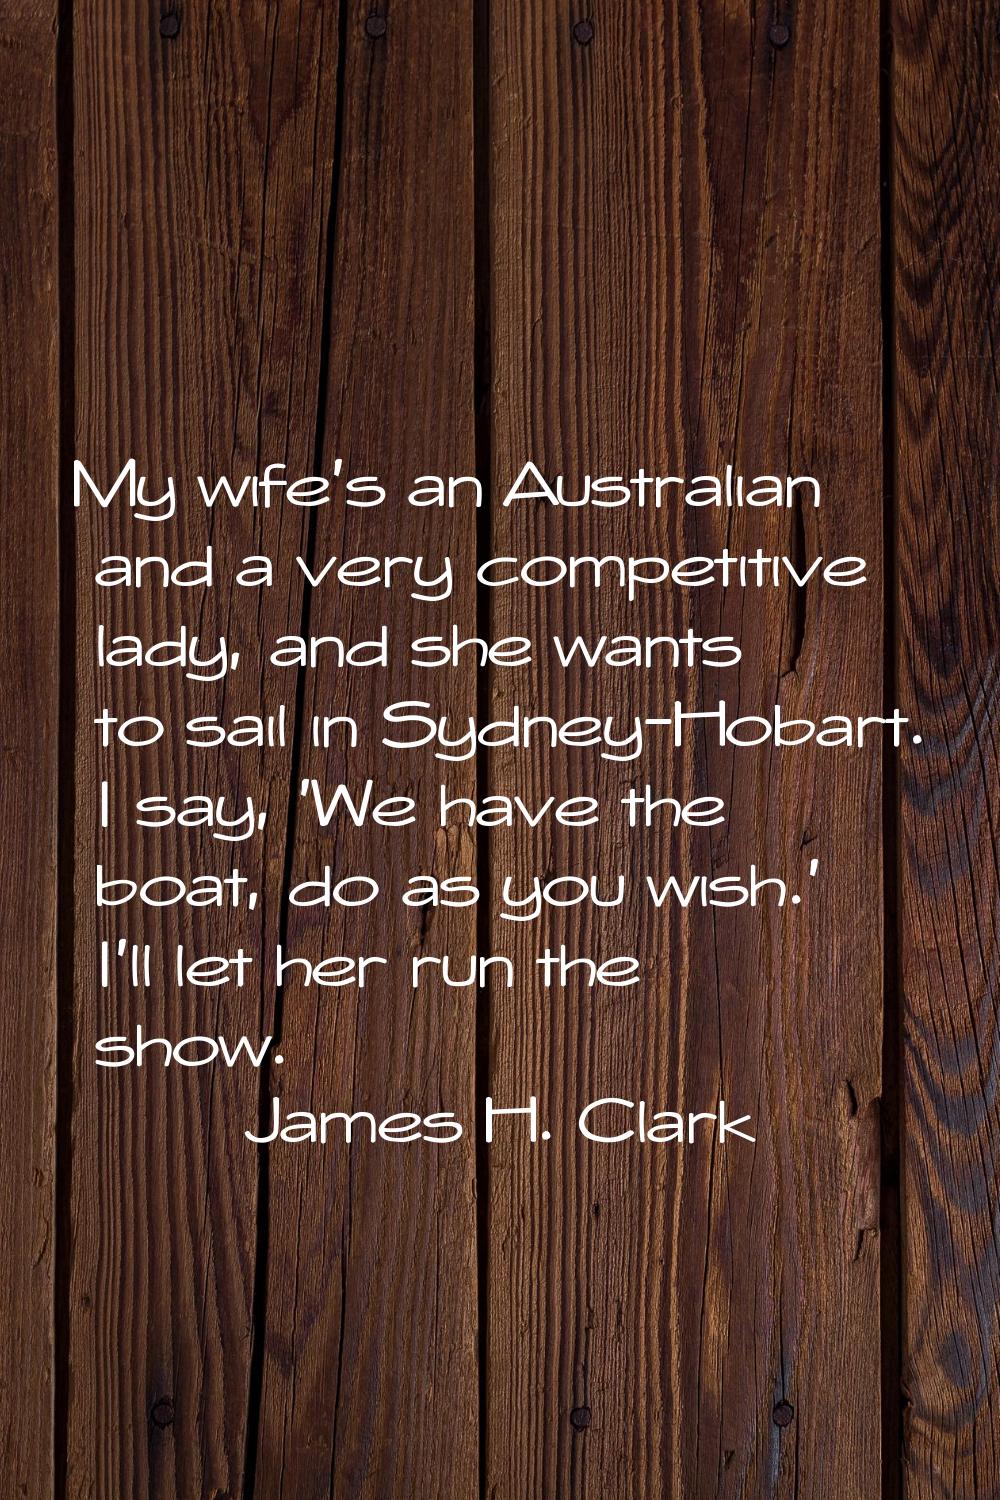 My wife's an Australian and a very competitive lady, and she wants to sail in Sydney-Hobart. I say,